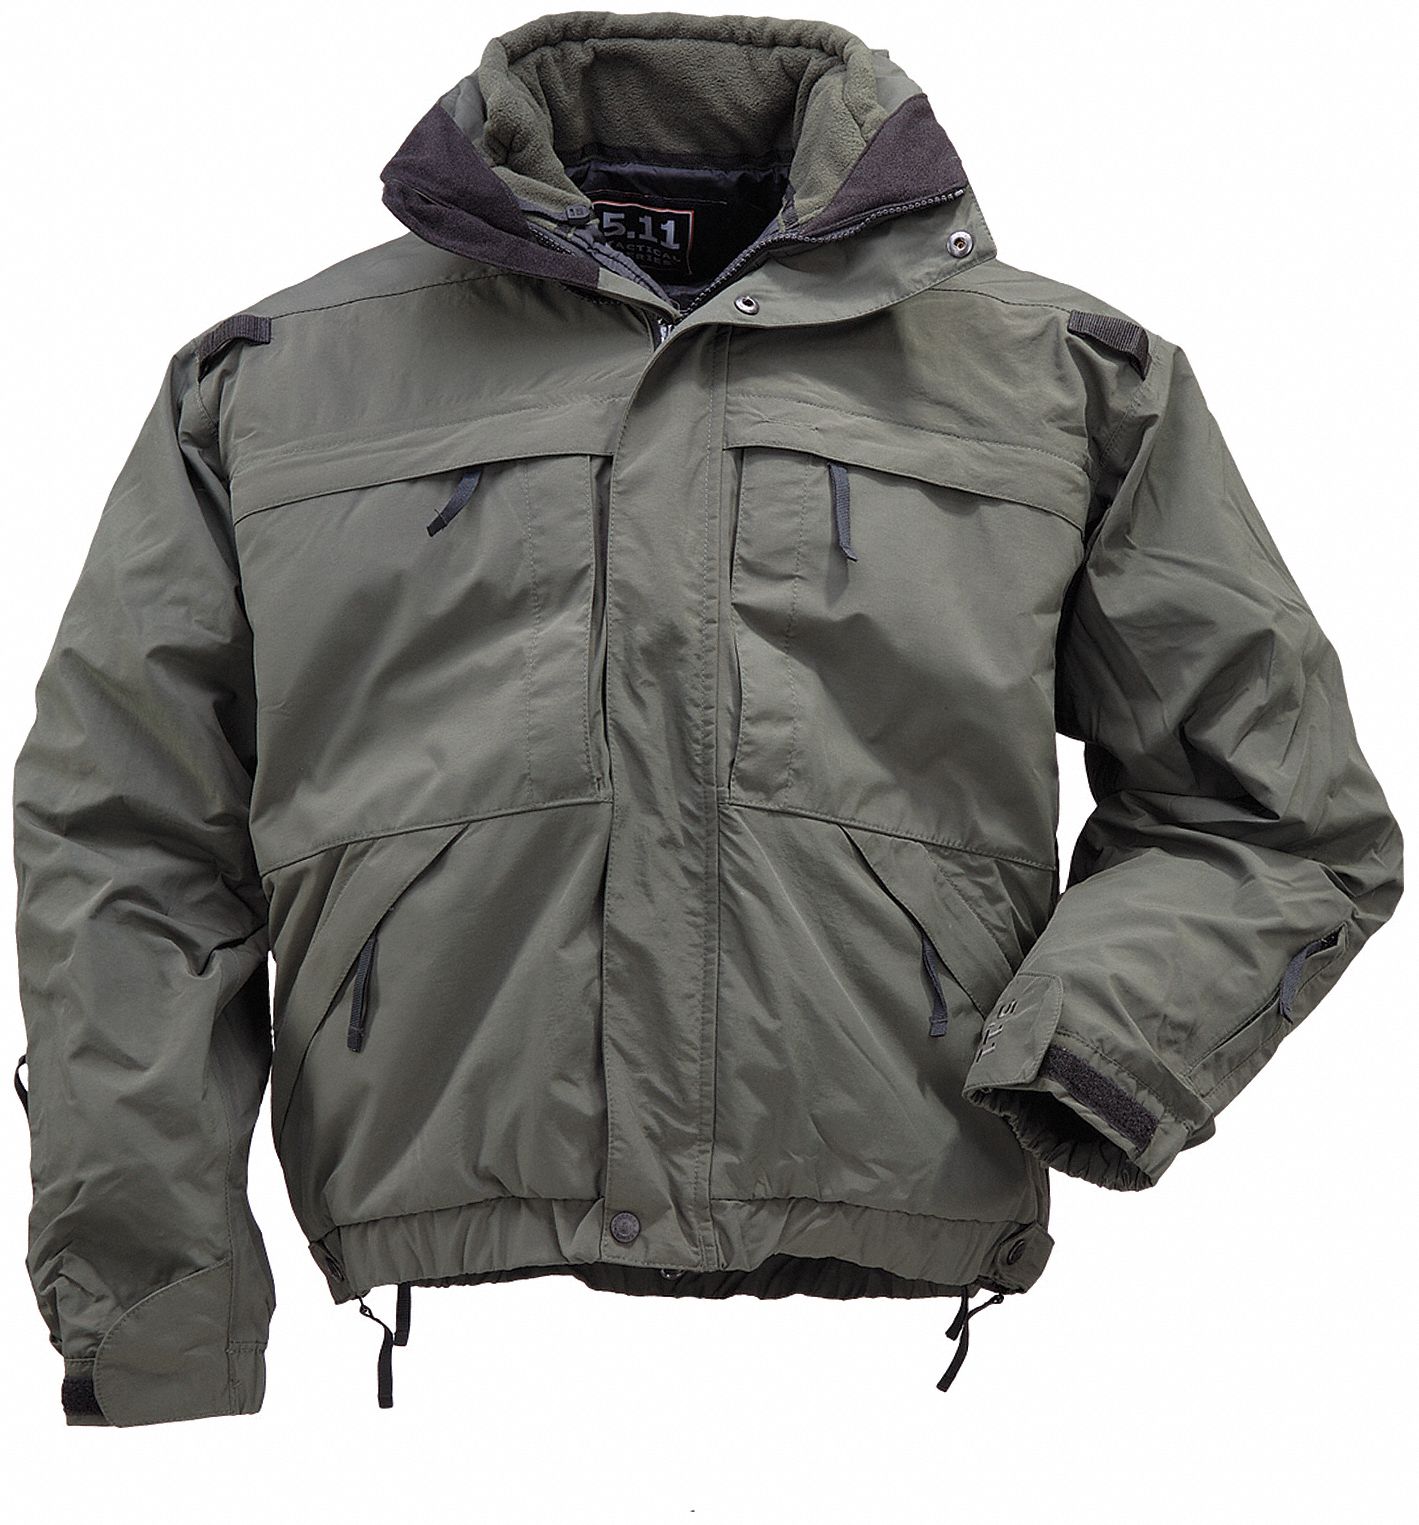 5 in 1 Jacket, M Fits Chest Size 38 in to 40 in, Forest Green Color ...